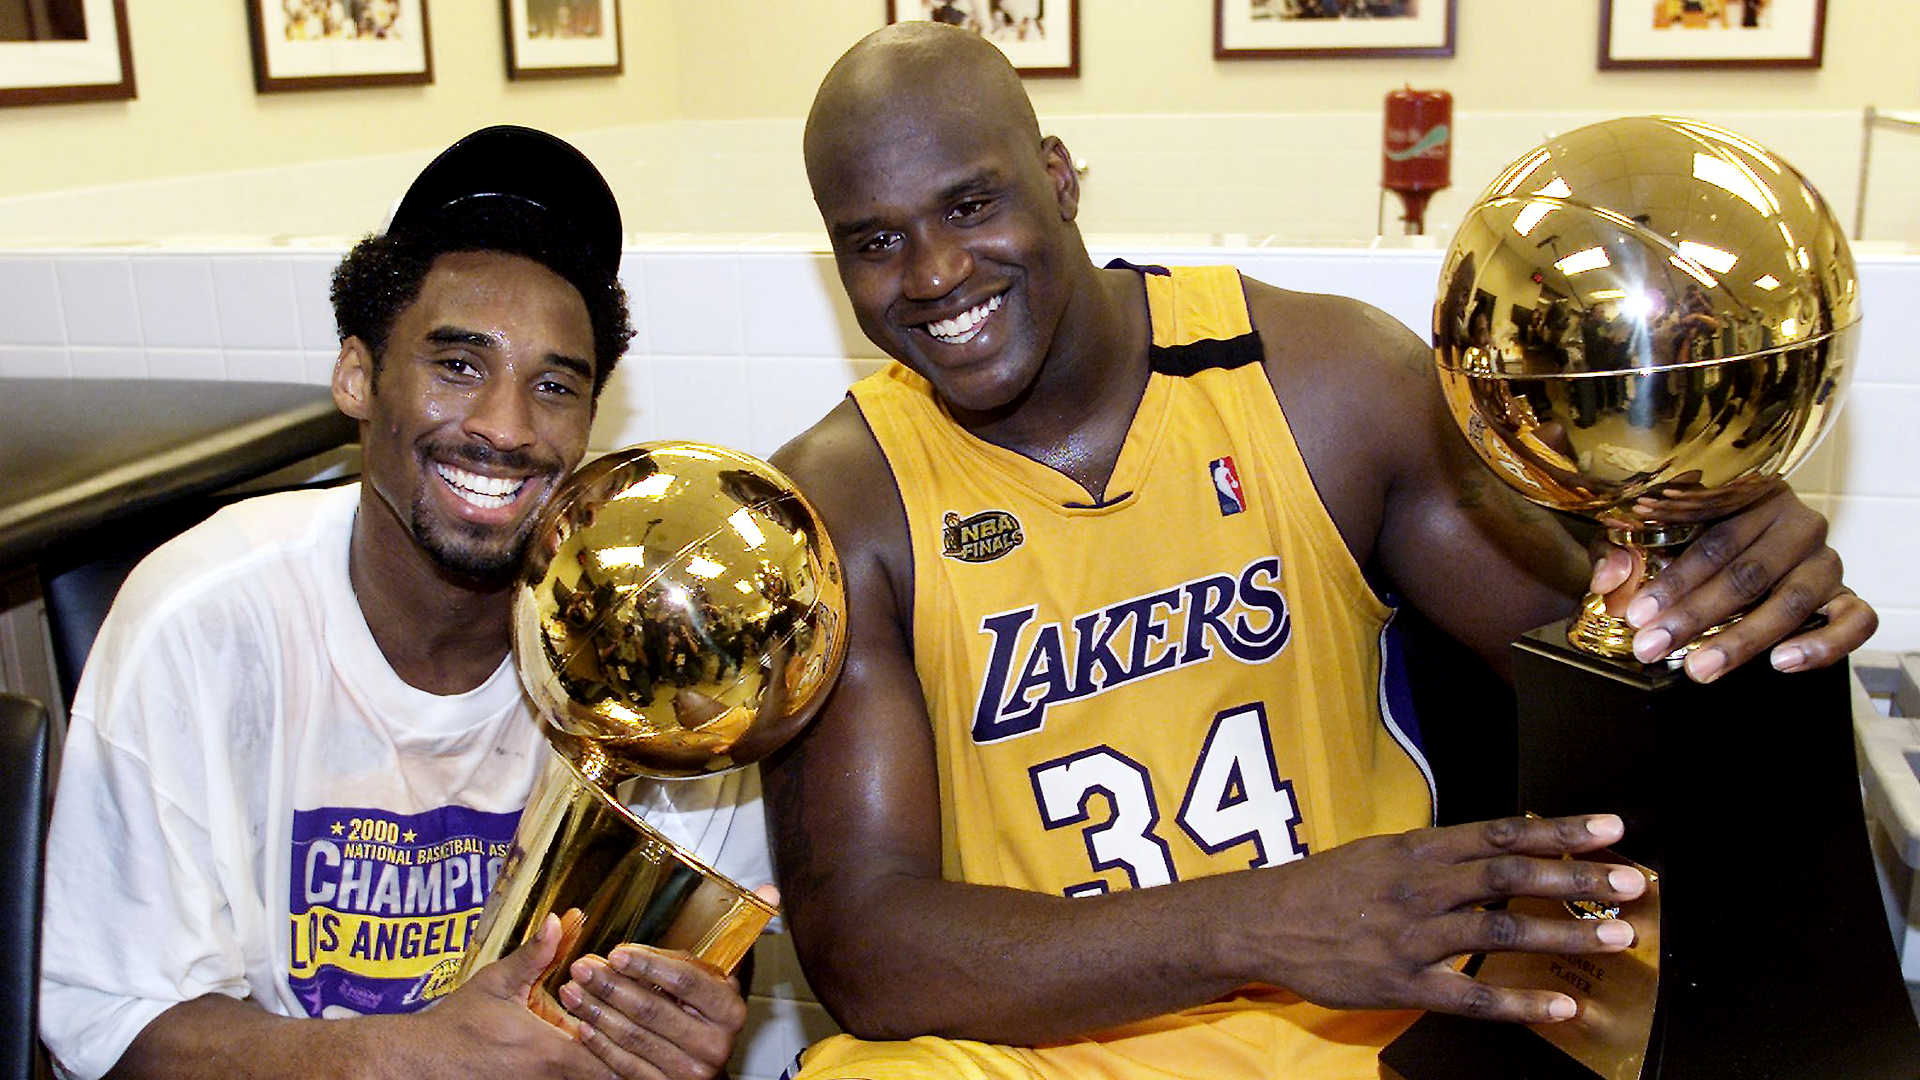 Shaquille O'Neal reflects on Kobe Bryant's death: 'He was so much